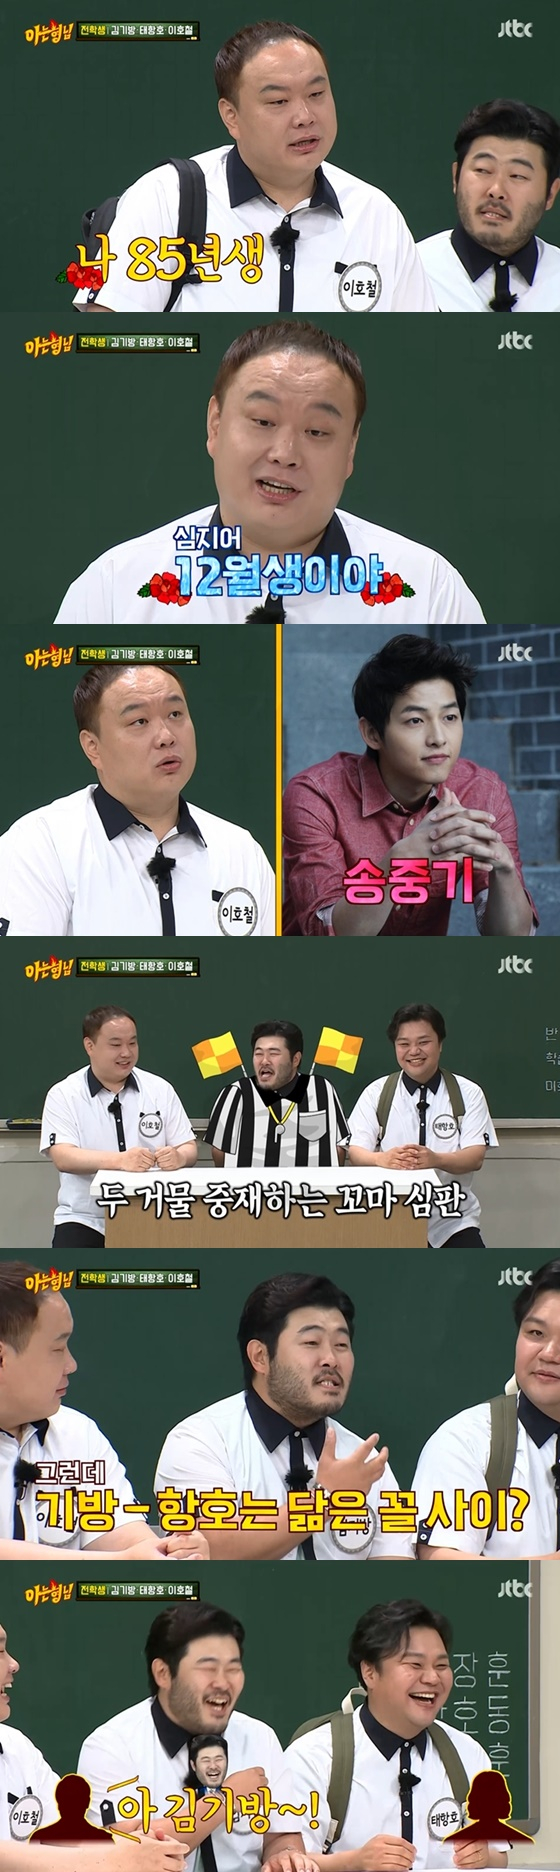 JTBC entertainment program Knowing Bros broadcasted on the afternoon of the 19th appeared as Actor Kim Ki-bang, Taehangho and Ho-Chul Lee as transfer students.On the show, Ho-Chul Lee said he was born in 1985. I am born in December. People do not know their faces.I didnt hear it (when I saw my face), he said, when asked who was an entertainer of the same age, there is a middle stage (song), and there is a comedian, Yang Se-hyung.There is also Lee Kwang-soo.Kang Ho-dong, who heard this, laughed, saying, I am 85 years old and my December life is a big hit. Kim Ki-bang said, It did not resemble (Taehangho).But Hangho had a drama, Its OK, Im Love. It was in the play (Joe) personality and Friend; Im actually (with Jo In-sung) Friend.She told me she saw the drama Its okay, its love. Im a real friend. She told me she was watching the drama. Taehangho said, When I took a drama for a while, two fans came and said, I watched the drama well.One of them said, You know, theres a Jo In-sung Friend. Then the other said, Oh, Kim Ki-bang.Lee Sang-min asked, Did you know the password for your house?Kim Ki-bang replied, We already have four sisters in the Friend house since the third month of dating, and they and my mother-in-law were cute to me.Kim Ki-bang said his Destiny about Jo In-sung - why?Kim Ki-bang said: Since I was in school, I was a mate (with Jo In-sung) and I went into class and I wanted to be close because my face was handsome.And I became very close, he said. I did something like Jo In-sung Friend. There was a comment, I can not do anything without Jo In-sung. I have never worked with personality.Personality has become a friend character because of its famous character. It can not be a friend personality.I think it is Destiny because I have to put such a title. Kim Ki-bang revealed that he had seen Seo Jang-hoon with Jo In-sung during his school days; Kim Ki-bang said, Jang Hoon wont remember.(Seo Jang-hoon) came to our school for a practice match, when Yonsei University was hot.All the students (seeing the practice match of Seo Jang-hoon) gathered at the gym, and I was not seen because I was short, but I only saw Jang Hoon.